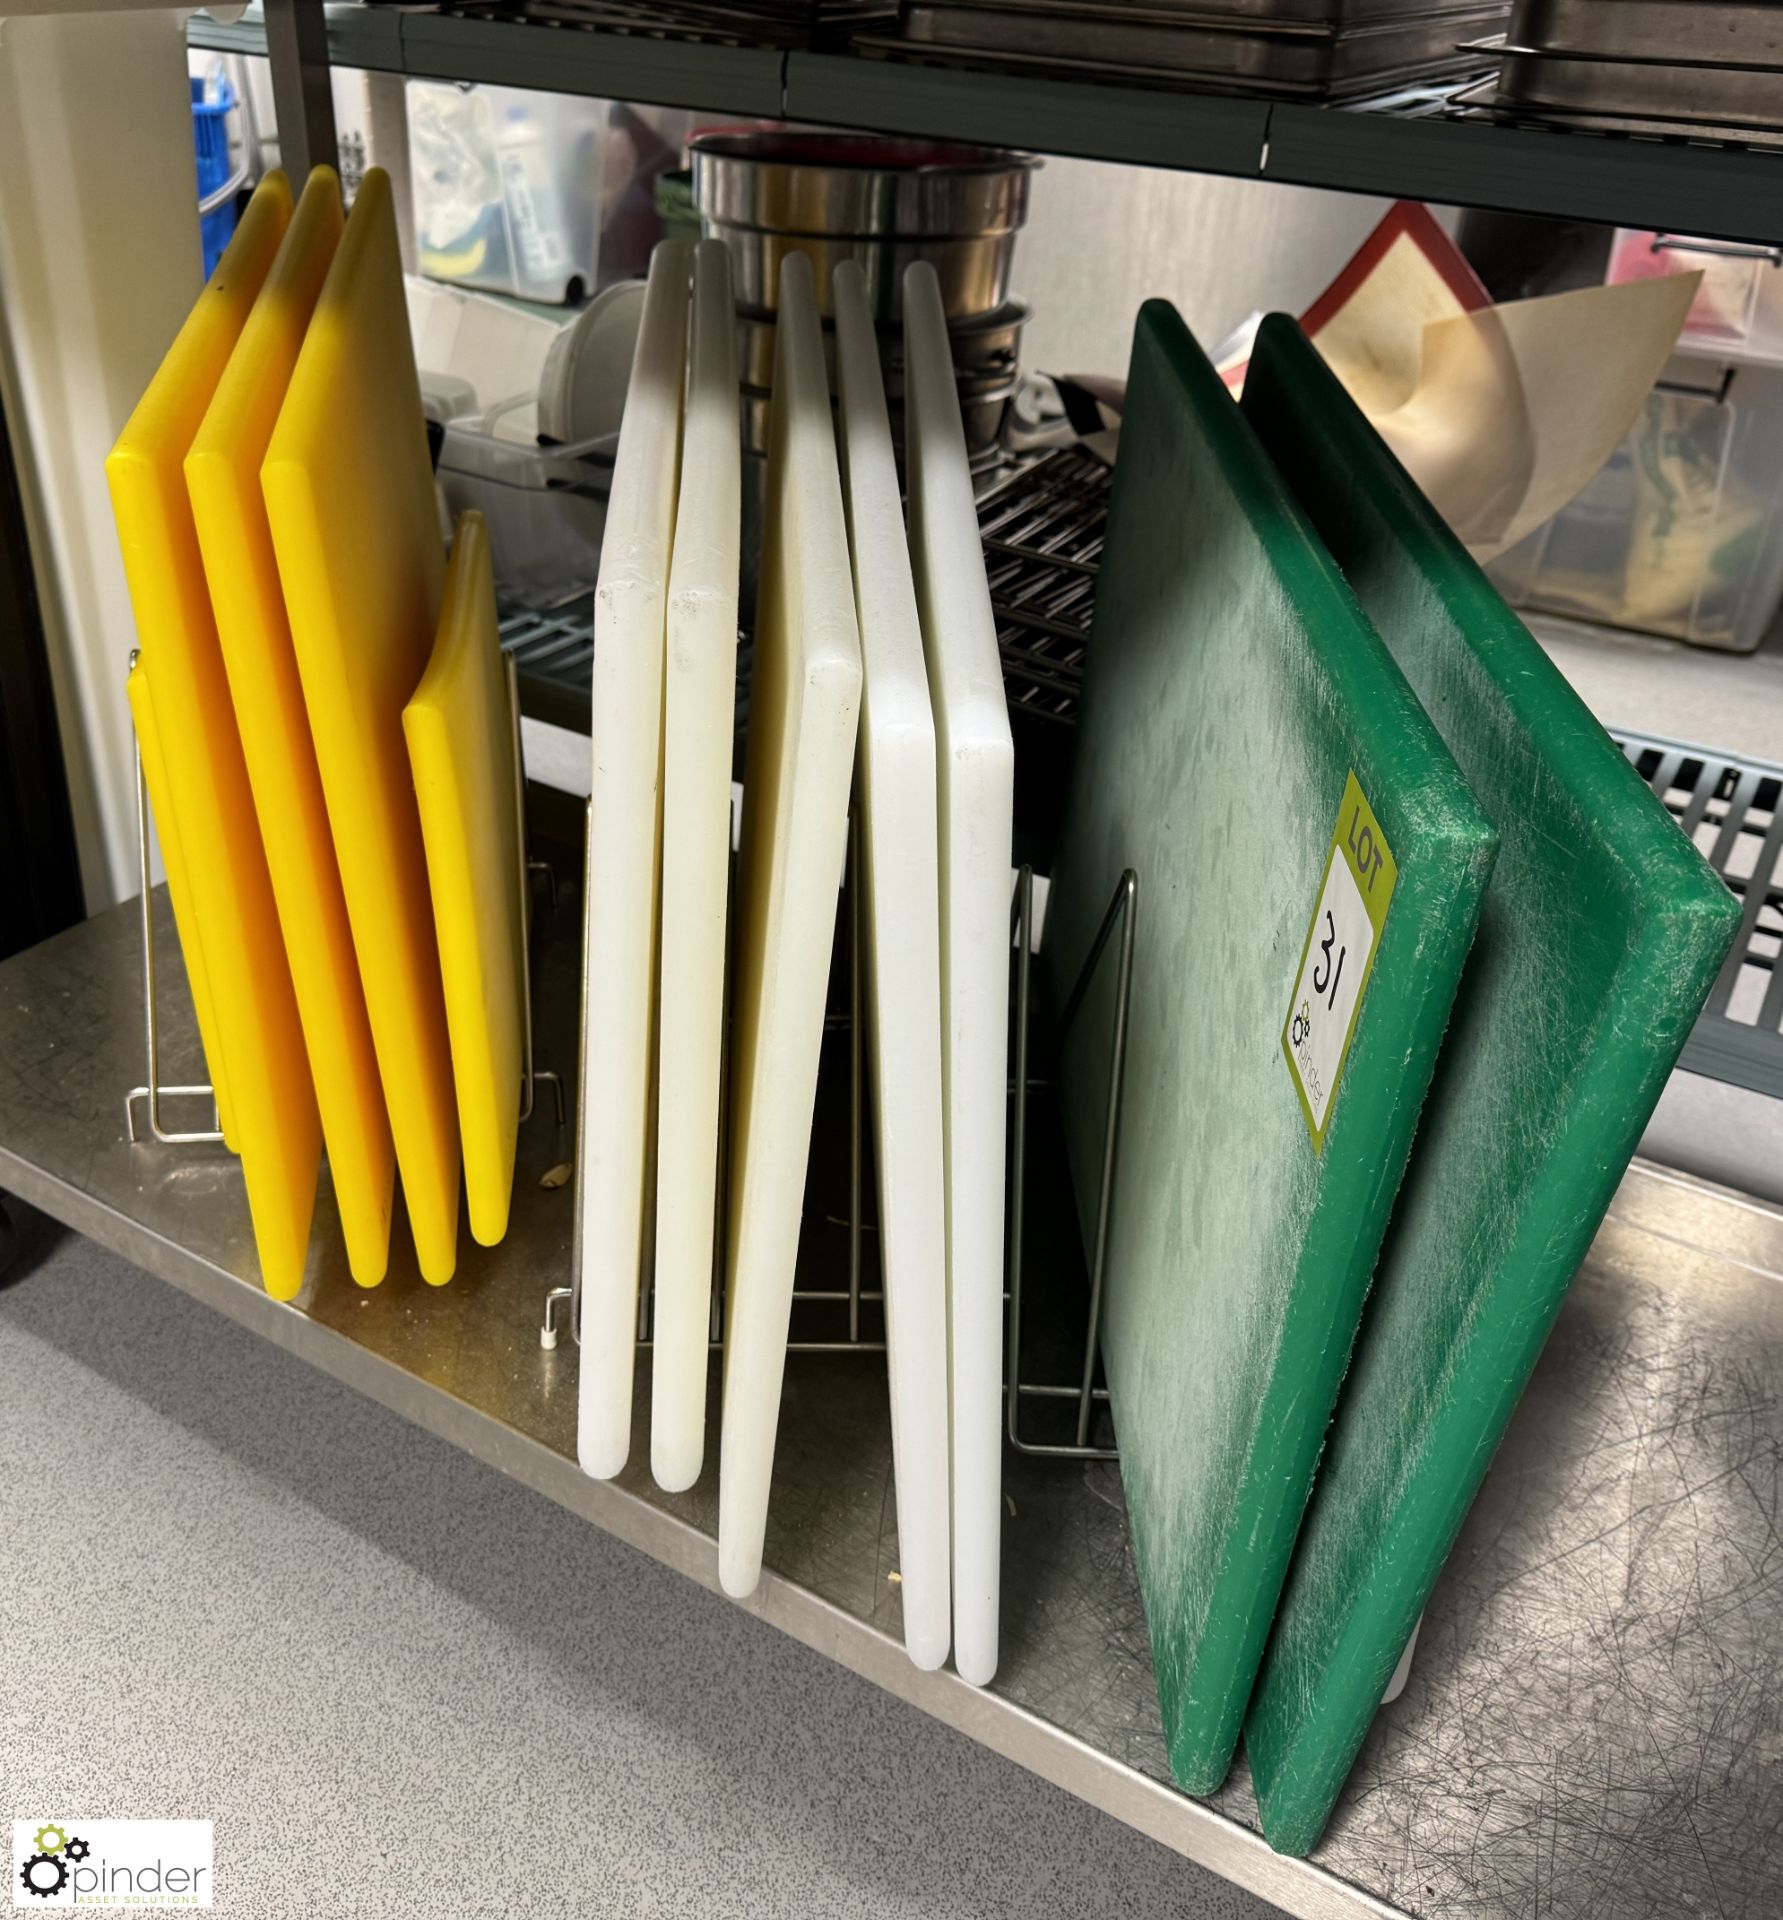 12 various Nylon Chopping Boards and 3 Board Stands (location in building – basement kitchen 1) - Image 2 of 4